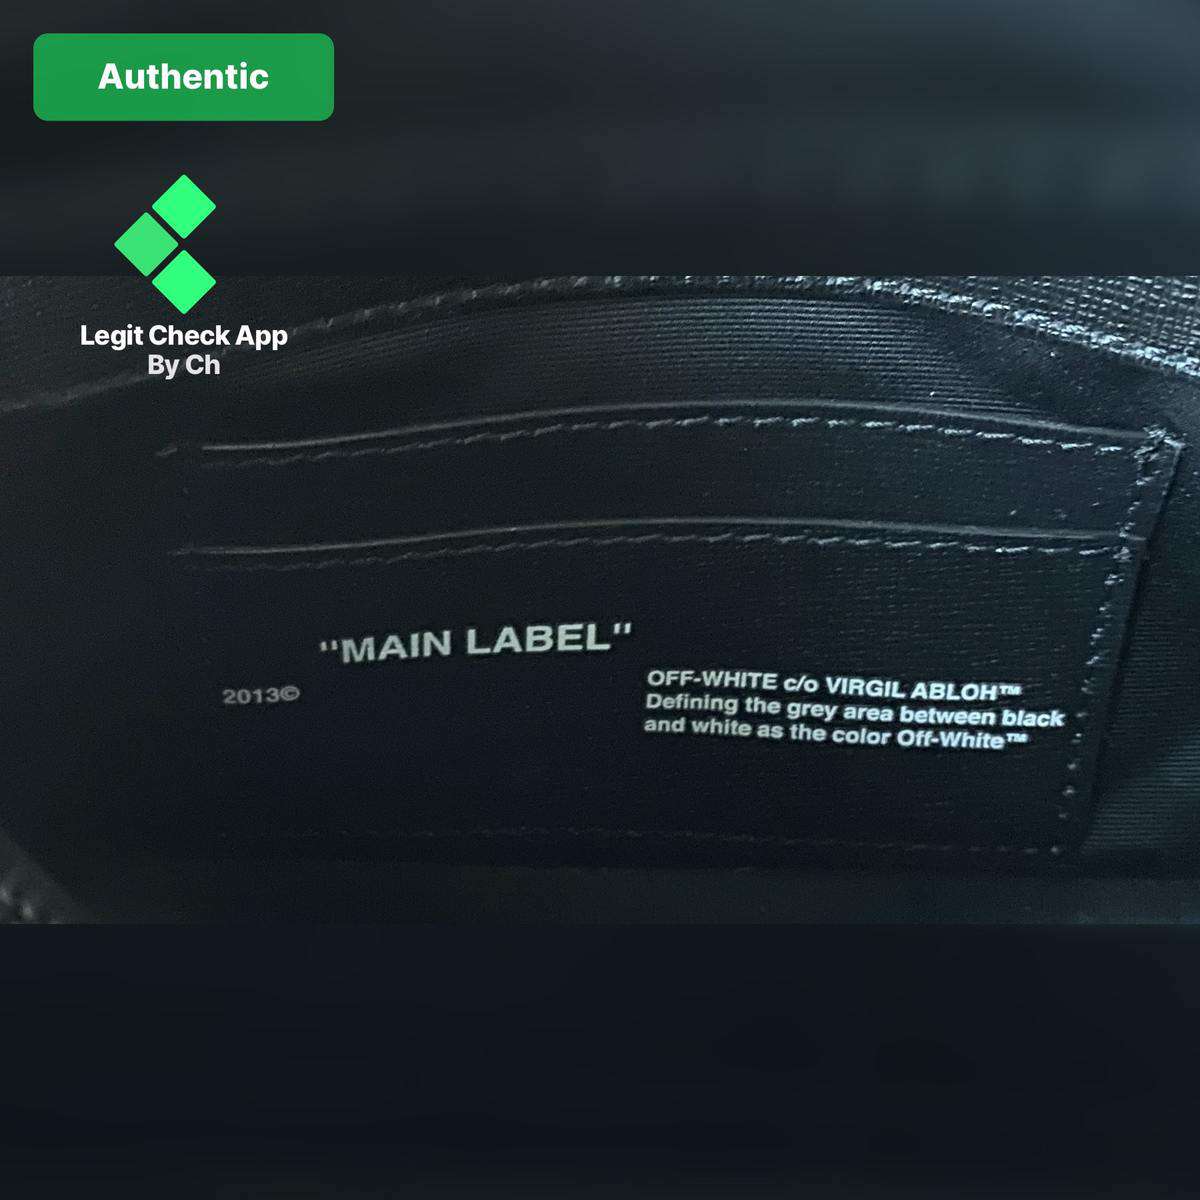 Virgil Abloh's Latest Off-White Bag Is Intentionally “Unfunctional”